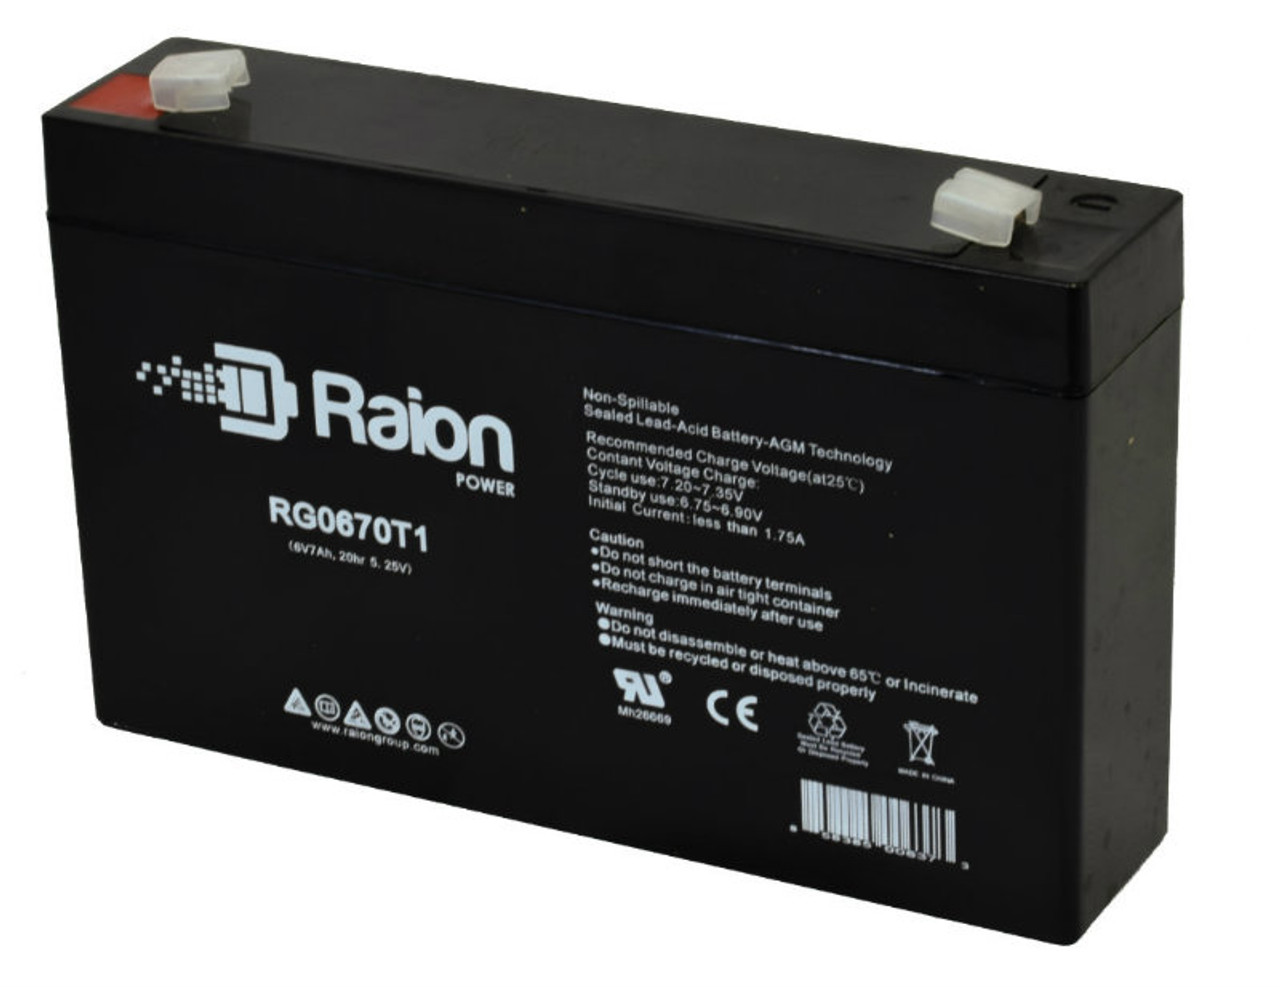 Raion Power RG0670T1 Replacement Battery for ELPower EP650 OEM Battery